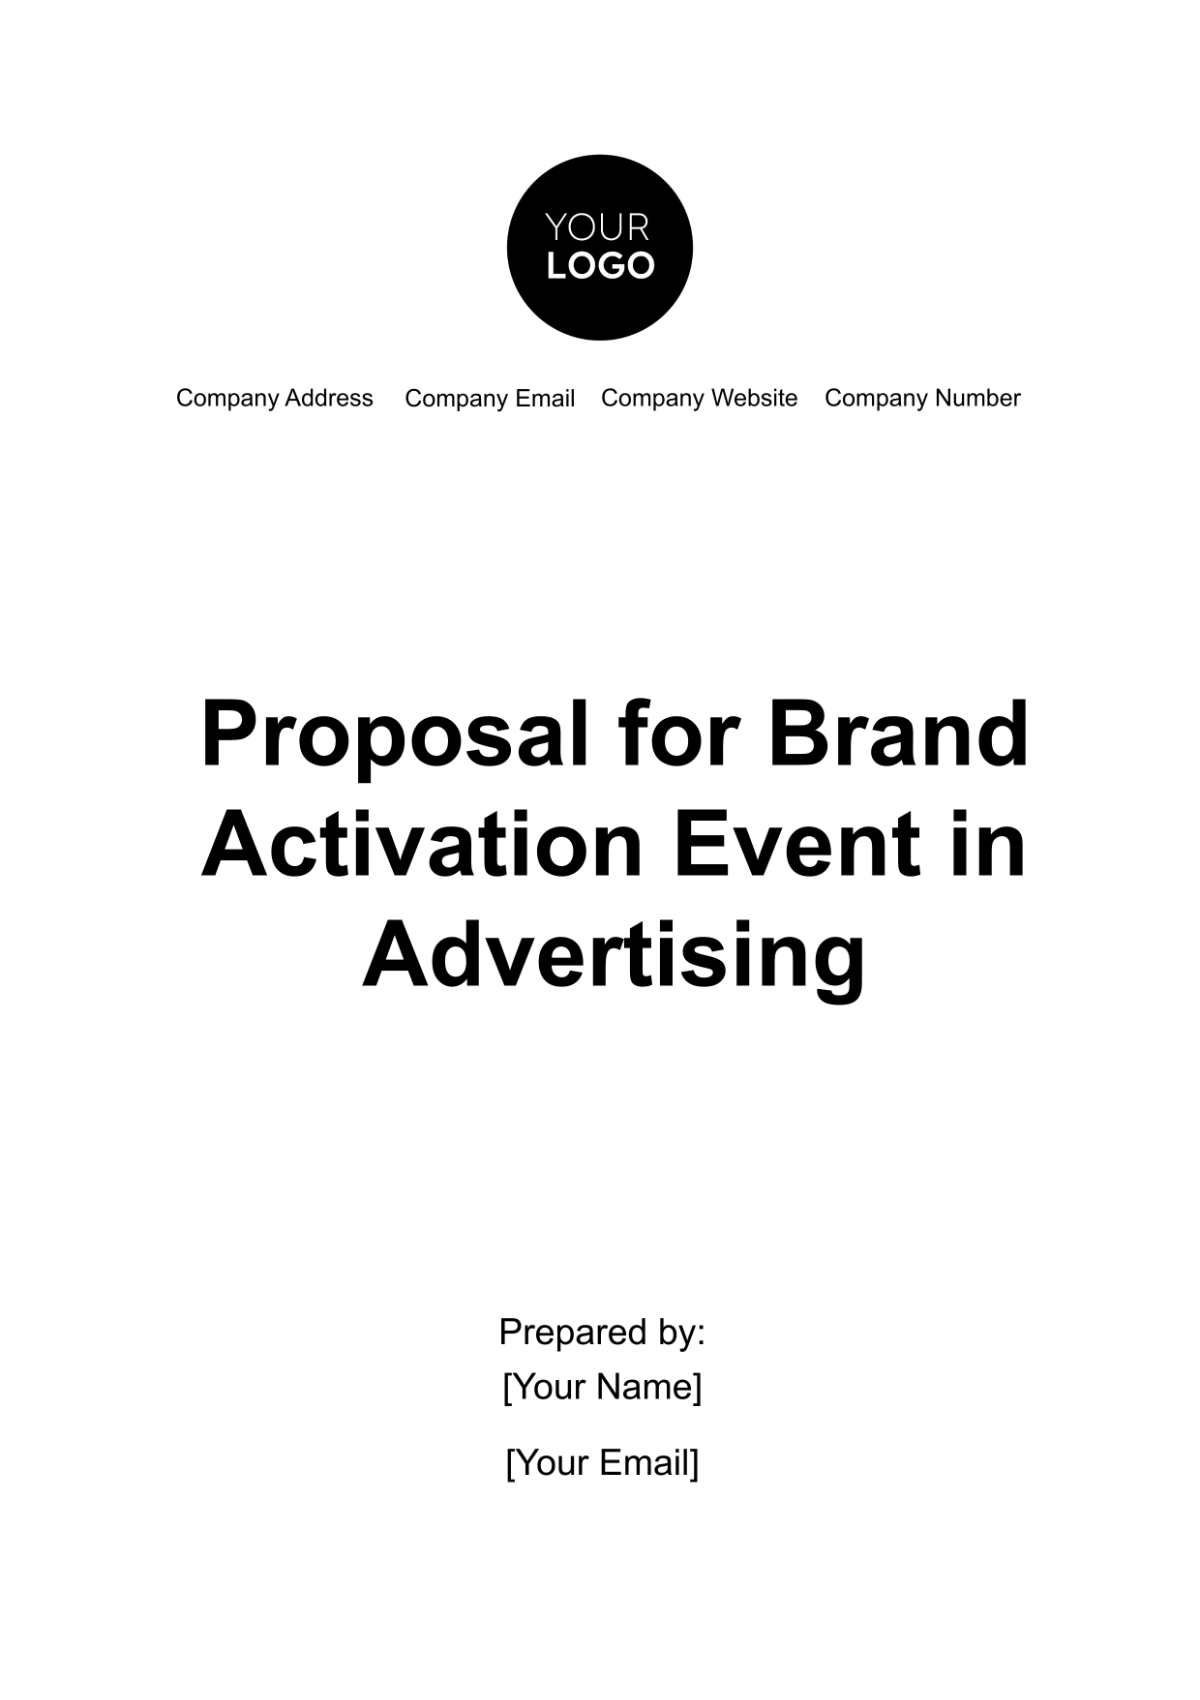 Proposal for Brand Activation Event in Advertising Template